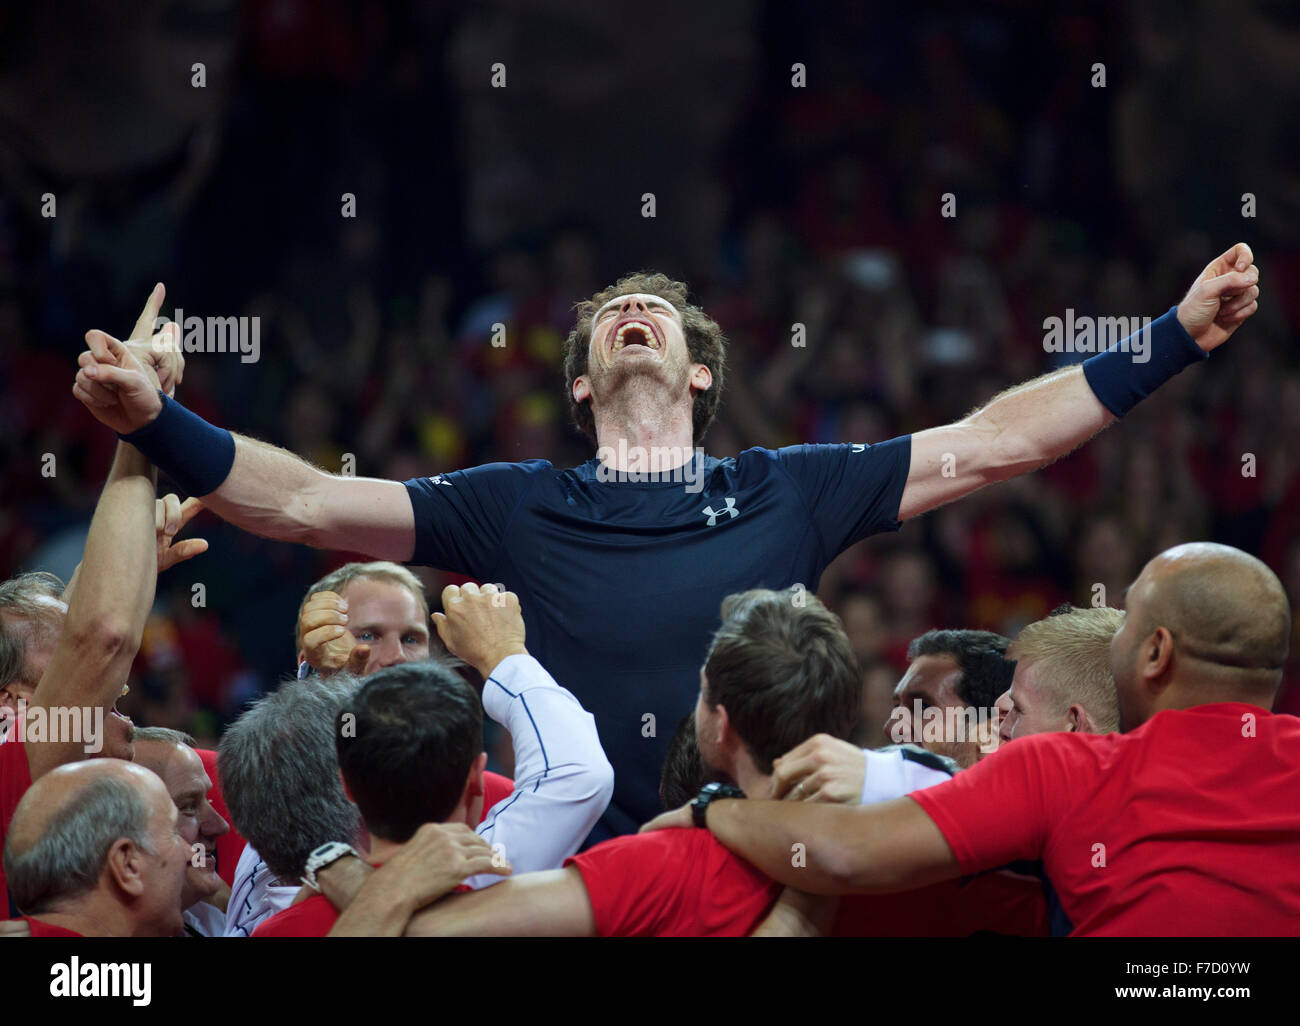 Gent, Belgium, November 29, 2015, Davis Cup Final, Belgium-Great Britain, day three, Andy Murray (GBR) screams it out in celebration while he is is lifted up by his team members, Great Britain wins the Davis Cup trophy 2015. Photo: Tennisimages/Henk Koster Stock Photo